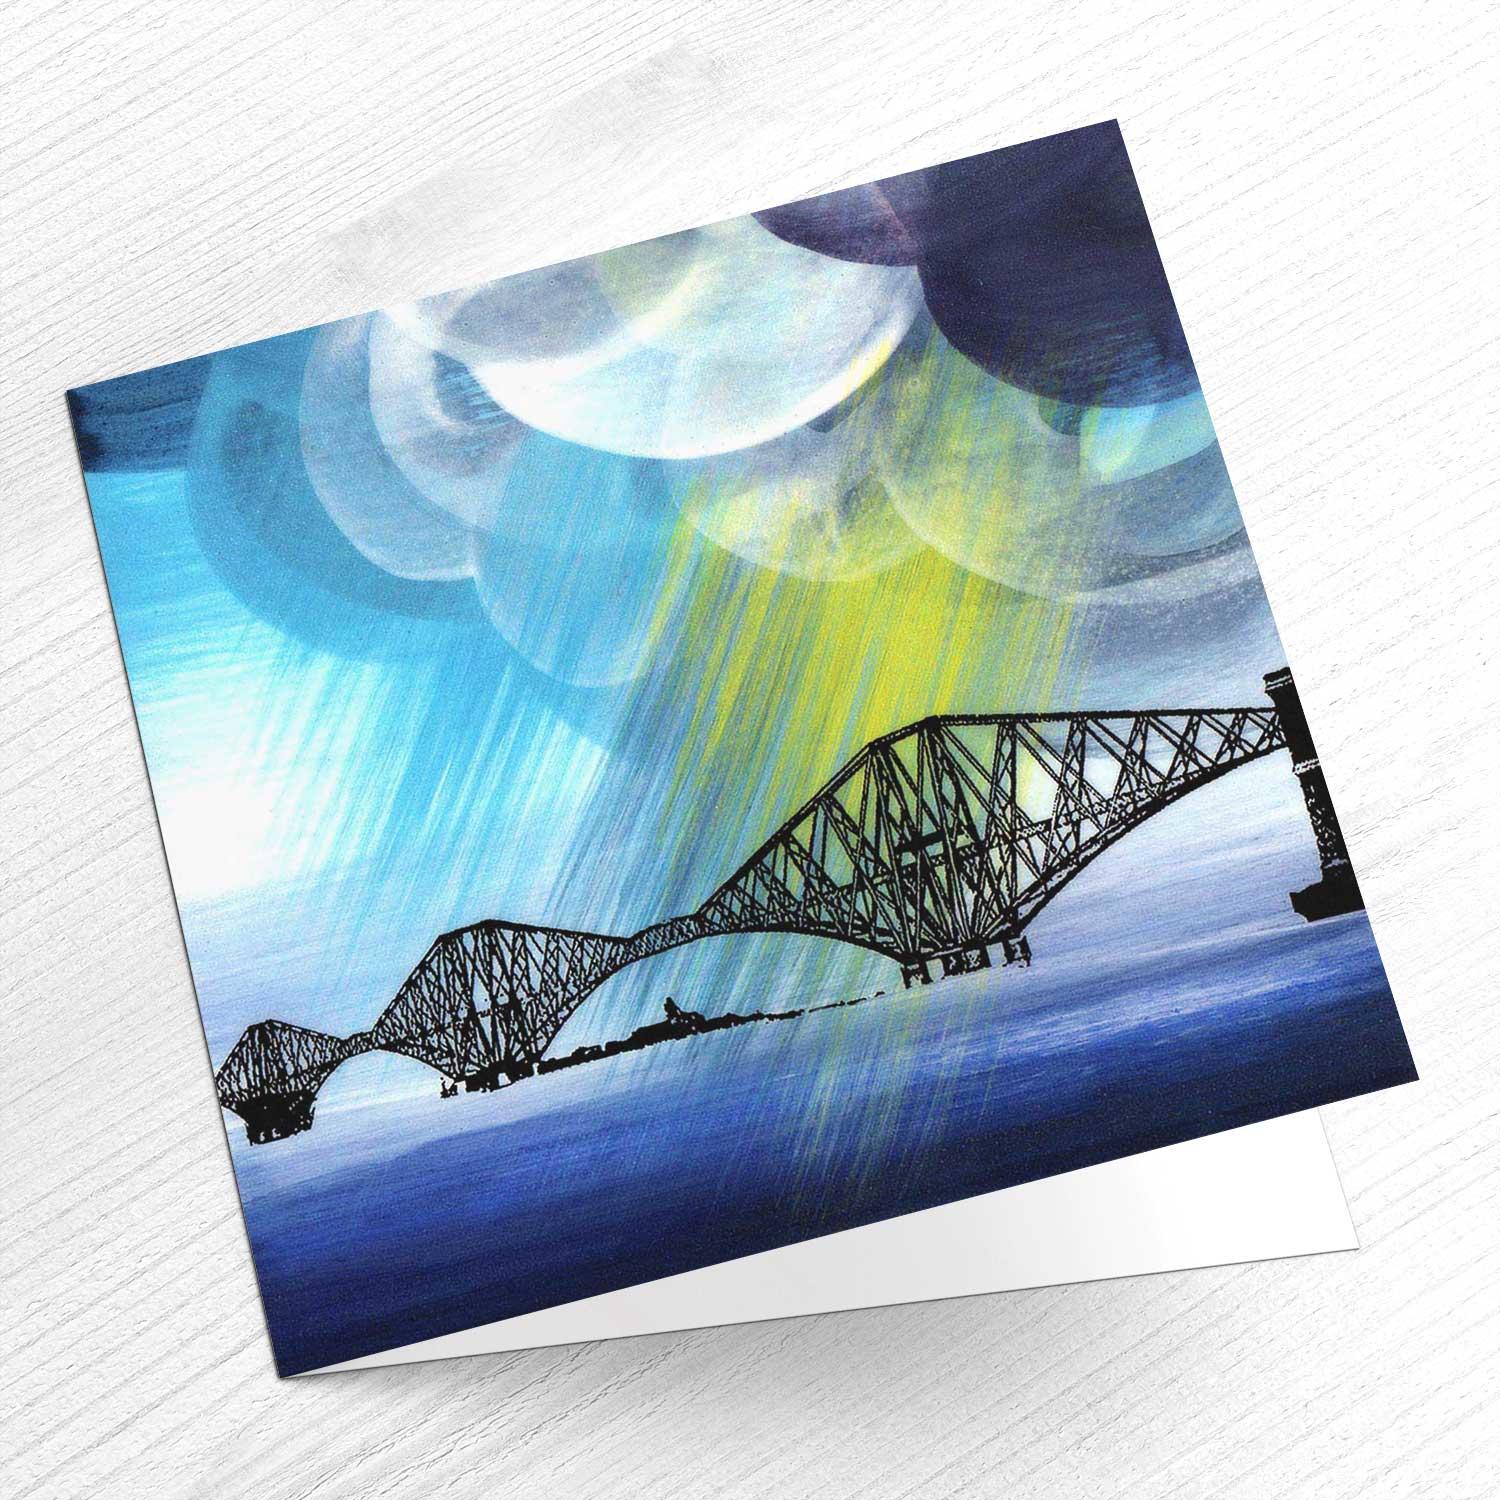 Storm Clouds Forth Rail Bridge Edinburgh Greeting Card from an original painting by artist Esther Cohen